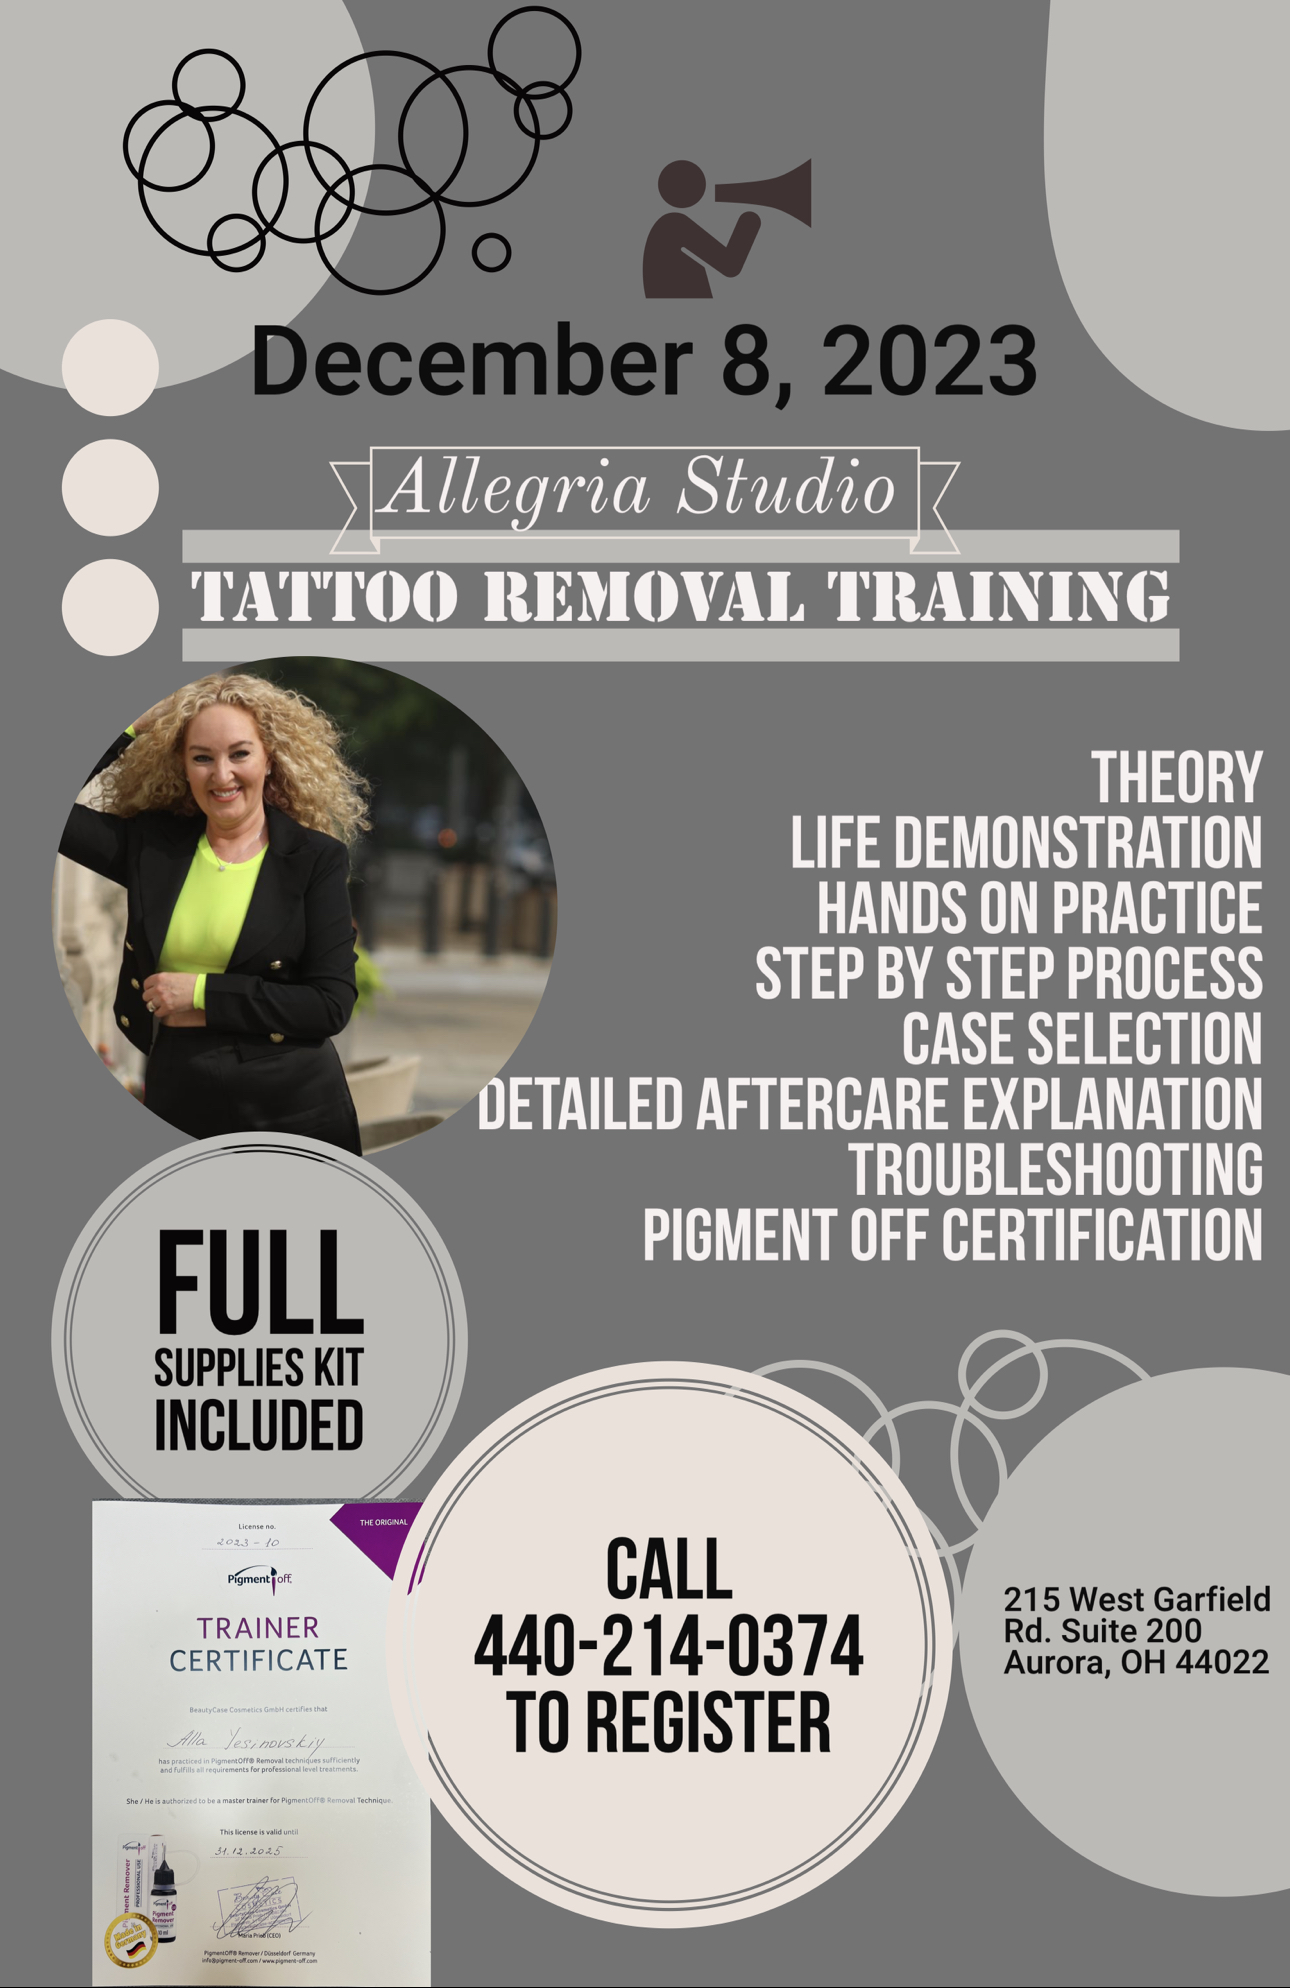 Laser Tattoo Removal Training in Ft. Lauderdale - April 25 & 26, 2024, 3020  N Federal Highway Suite 11, Fort Lauderdale, FL 33306, 25 April to 26 April  | AllEvents.in